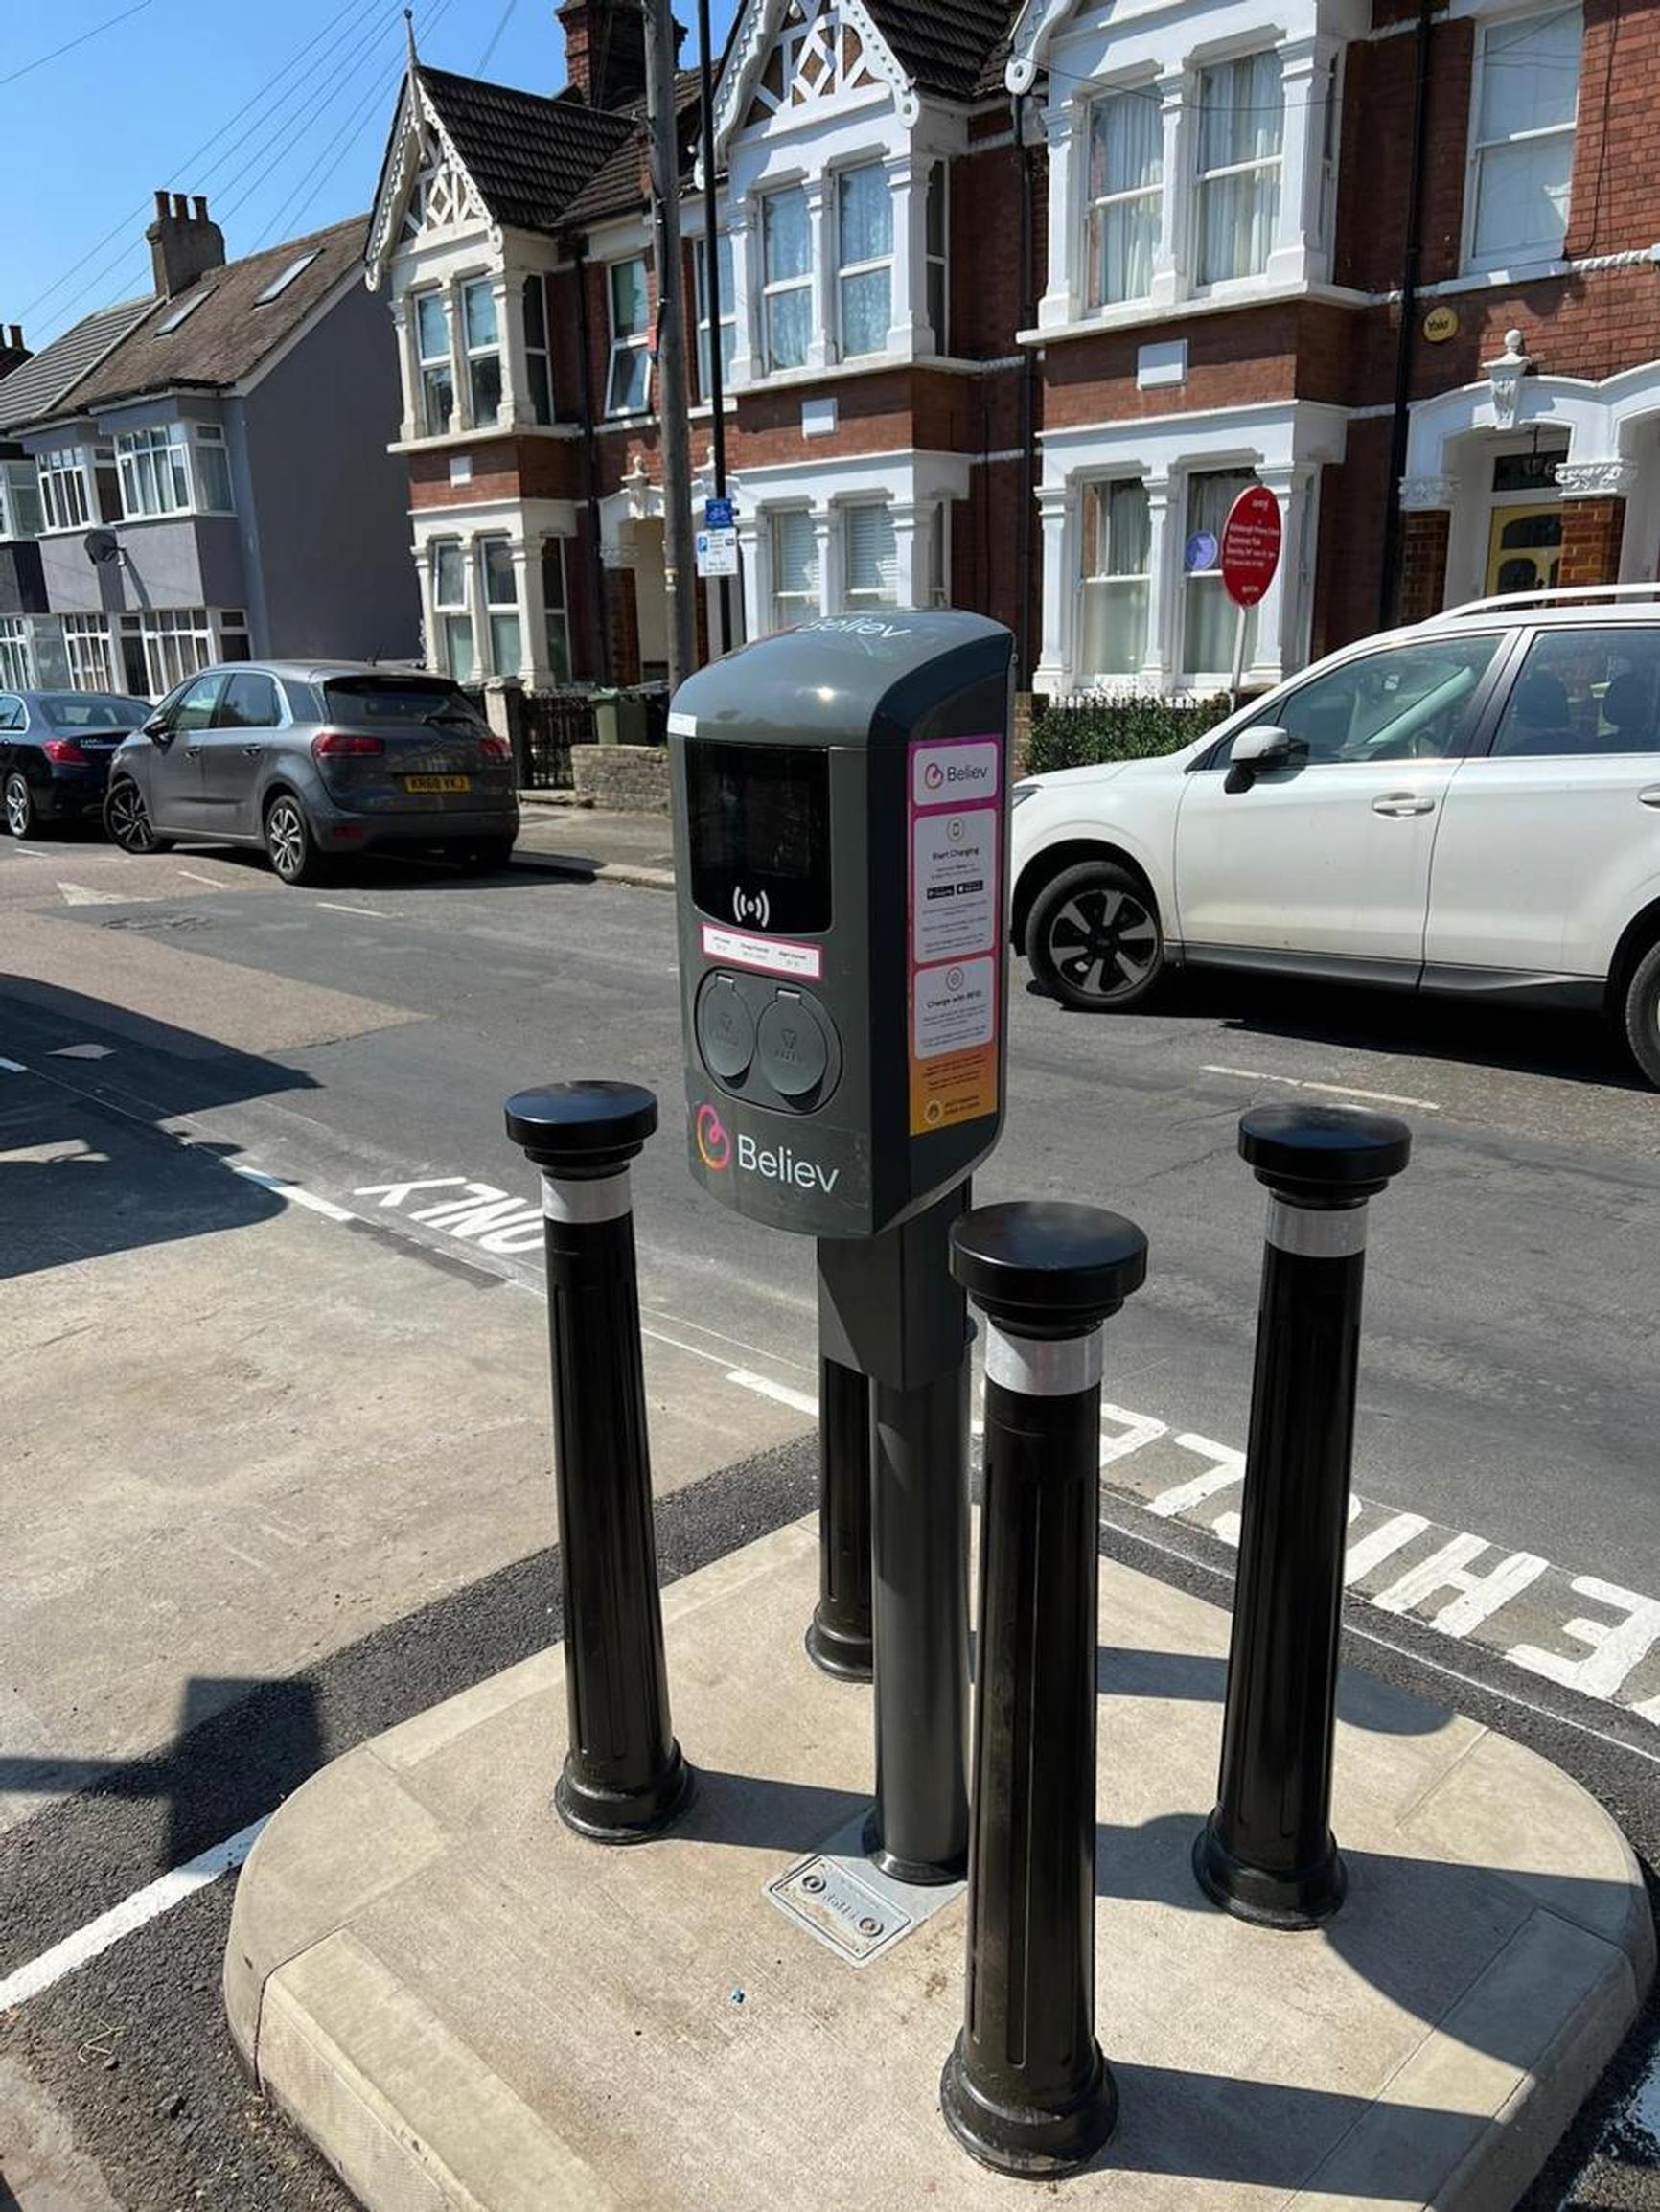 A Believ chargepoint in Waltham Forest